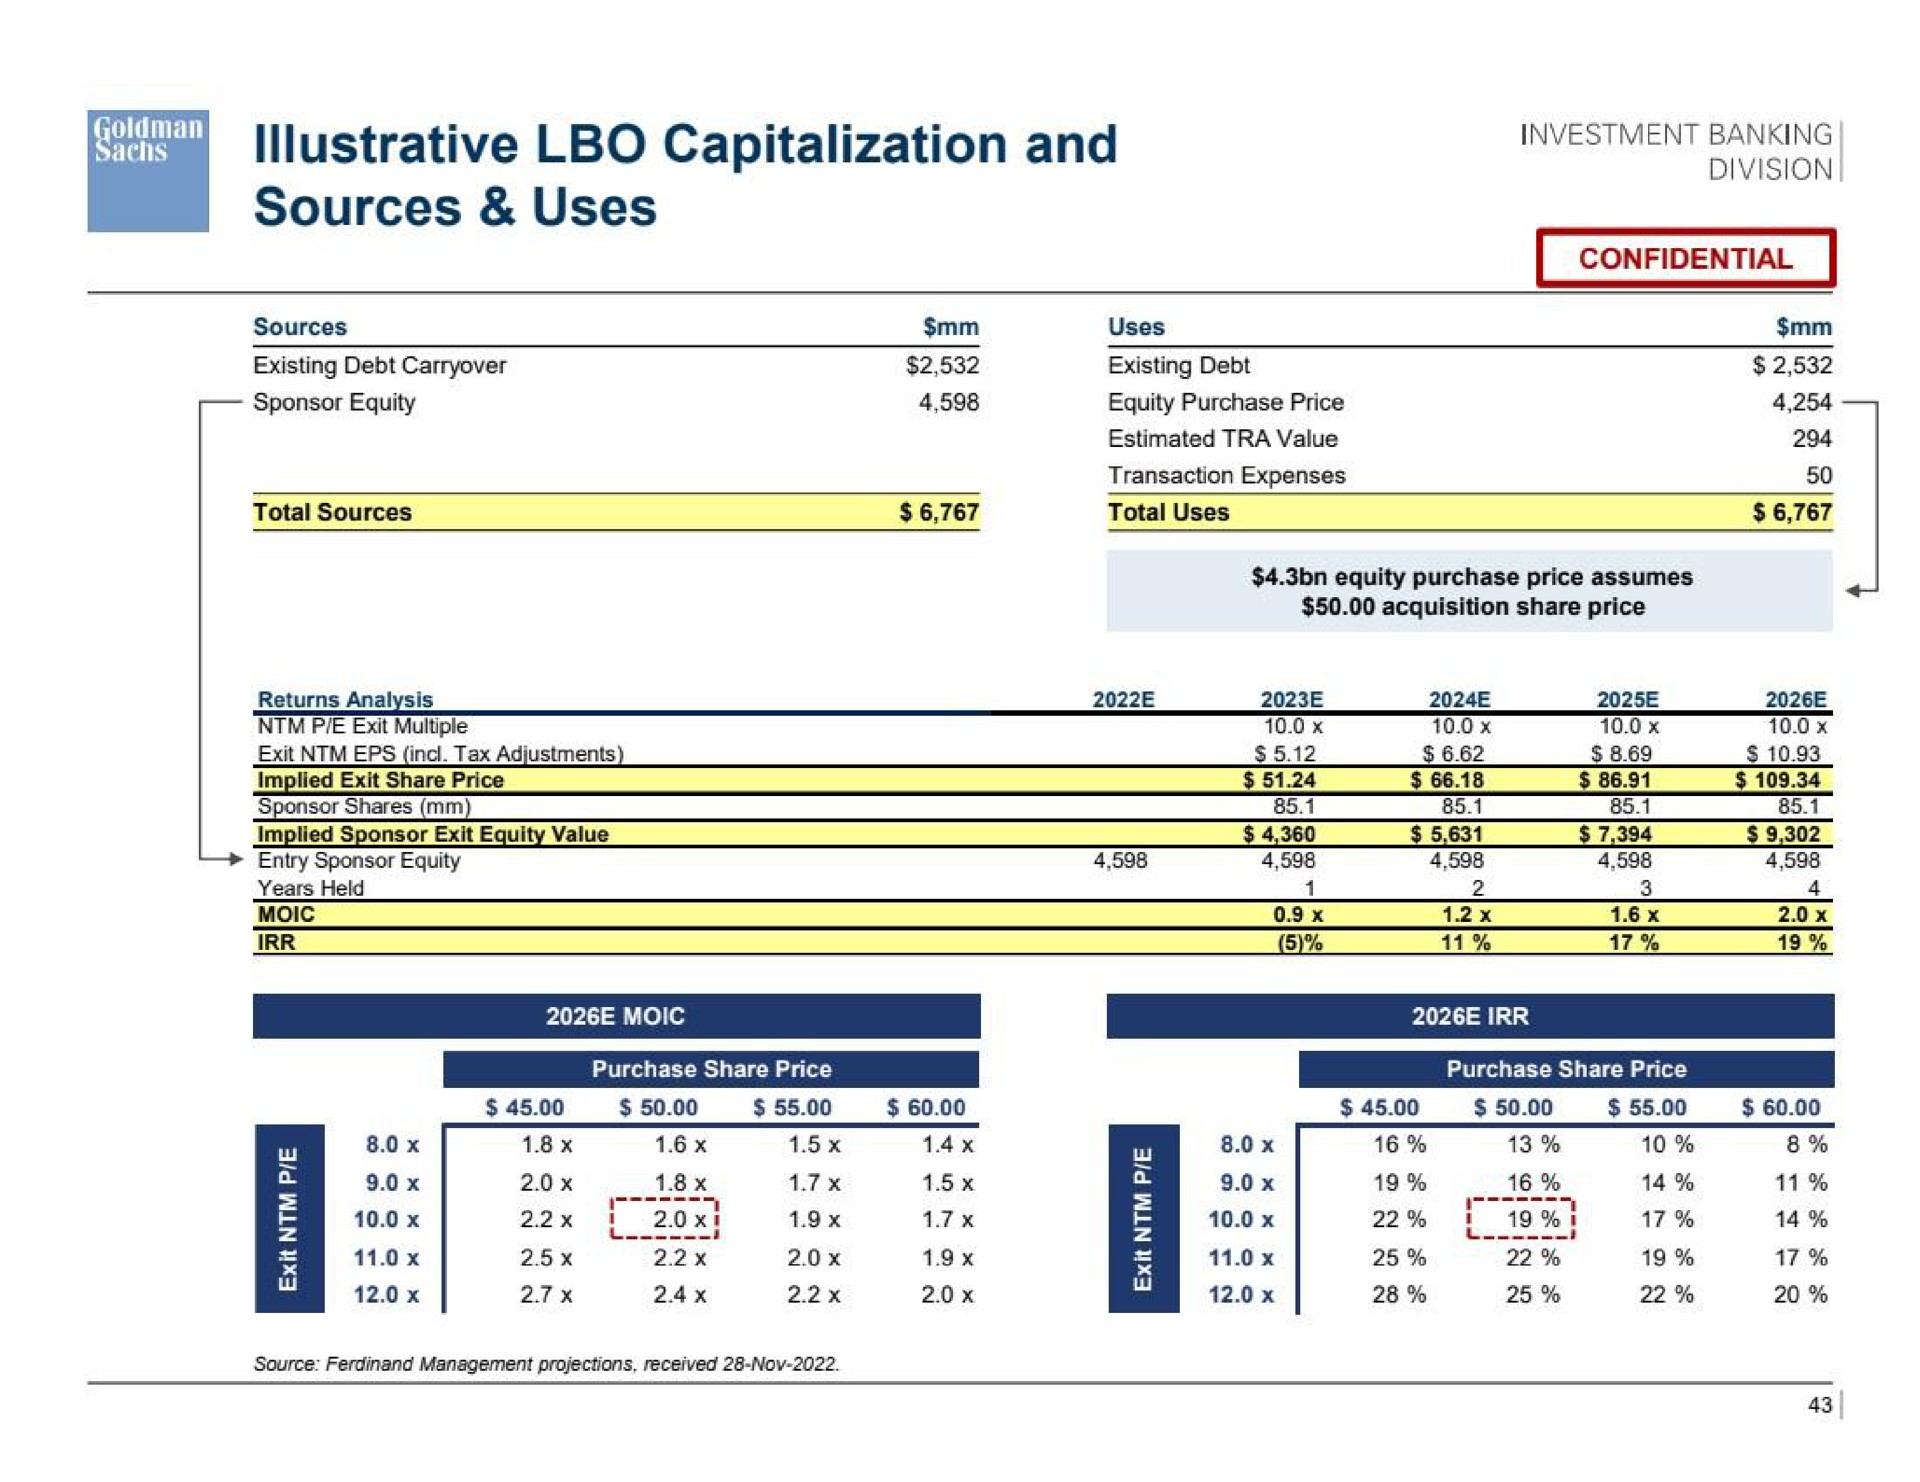 illustrative capitalization and sources uses investment banking | Goldman Sachs